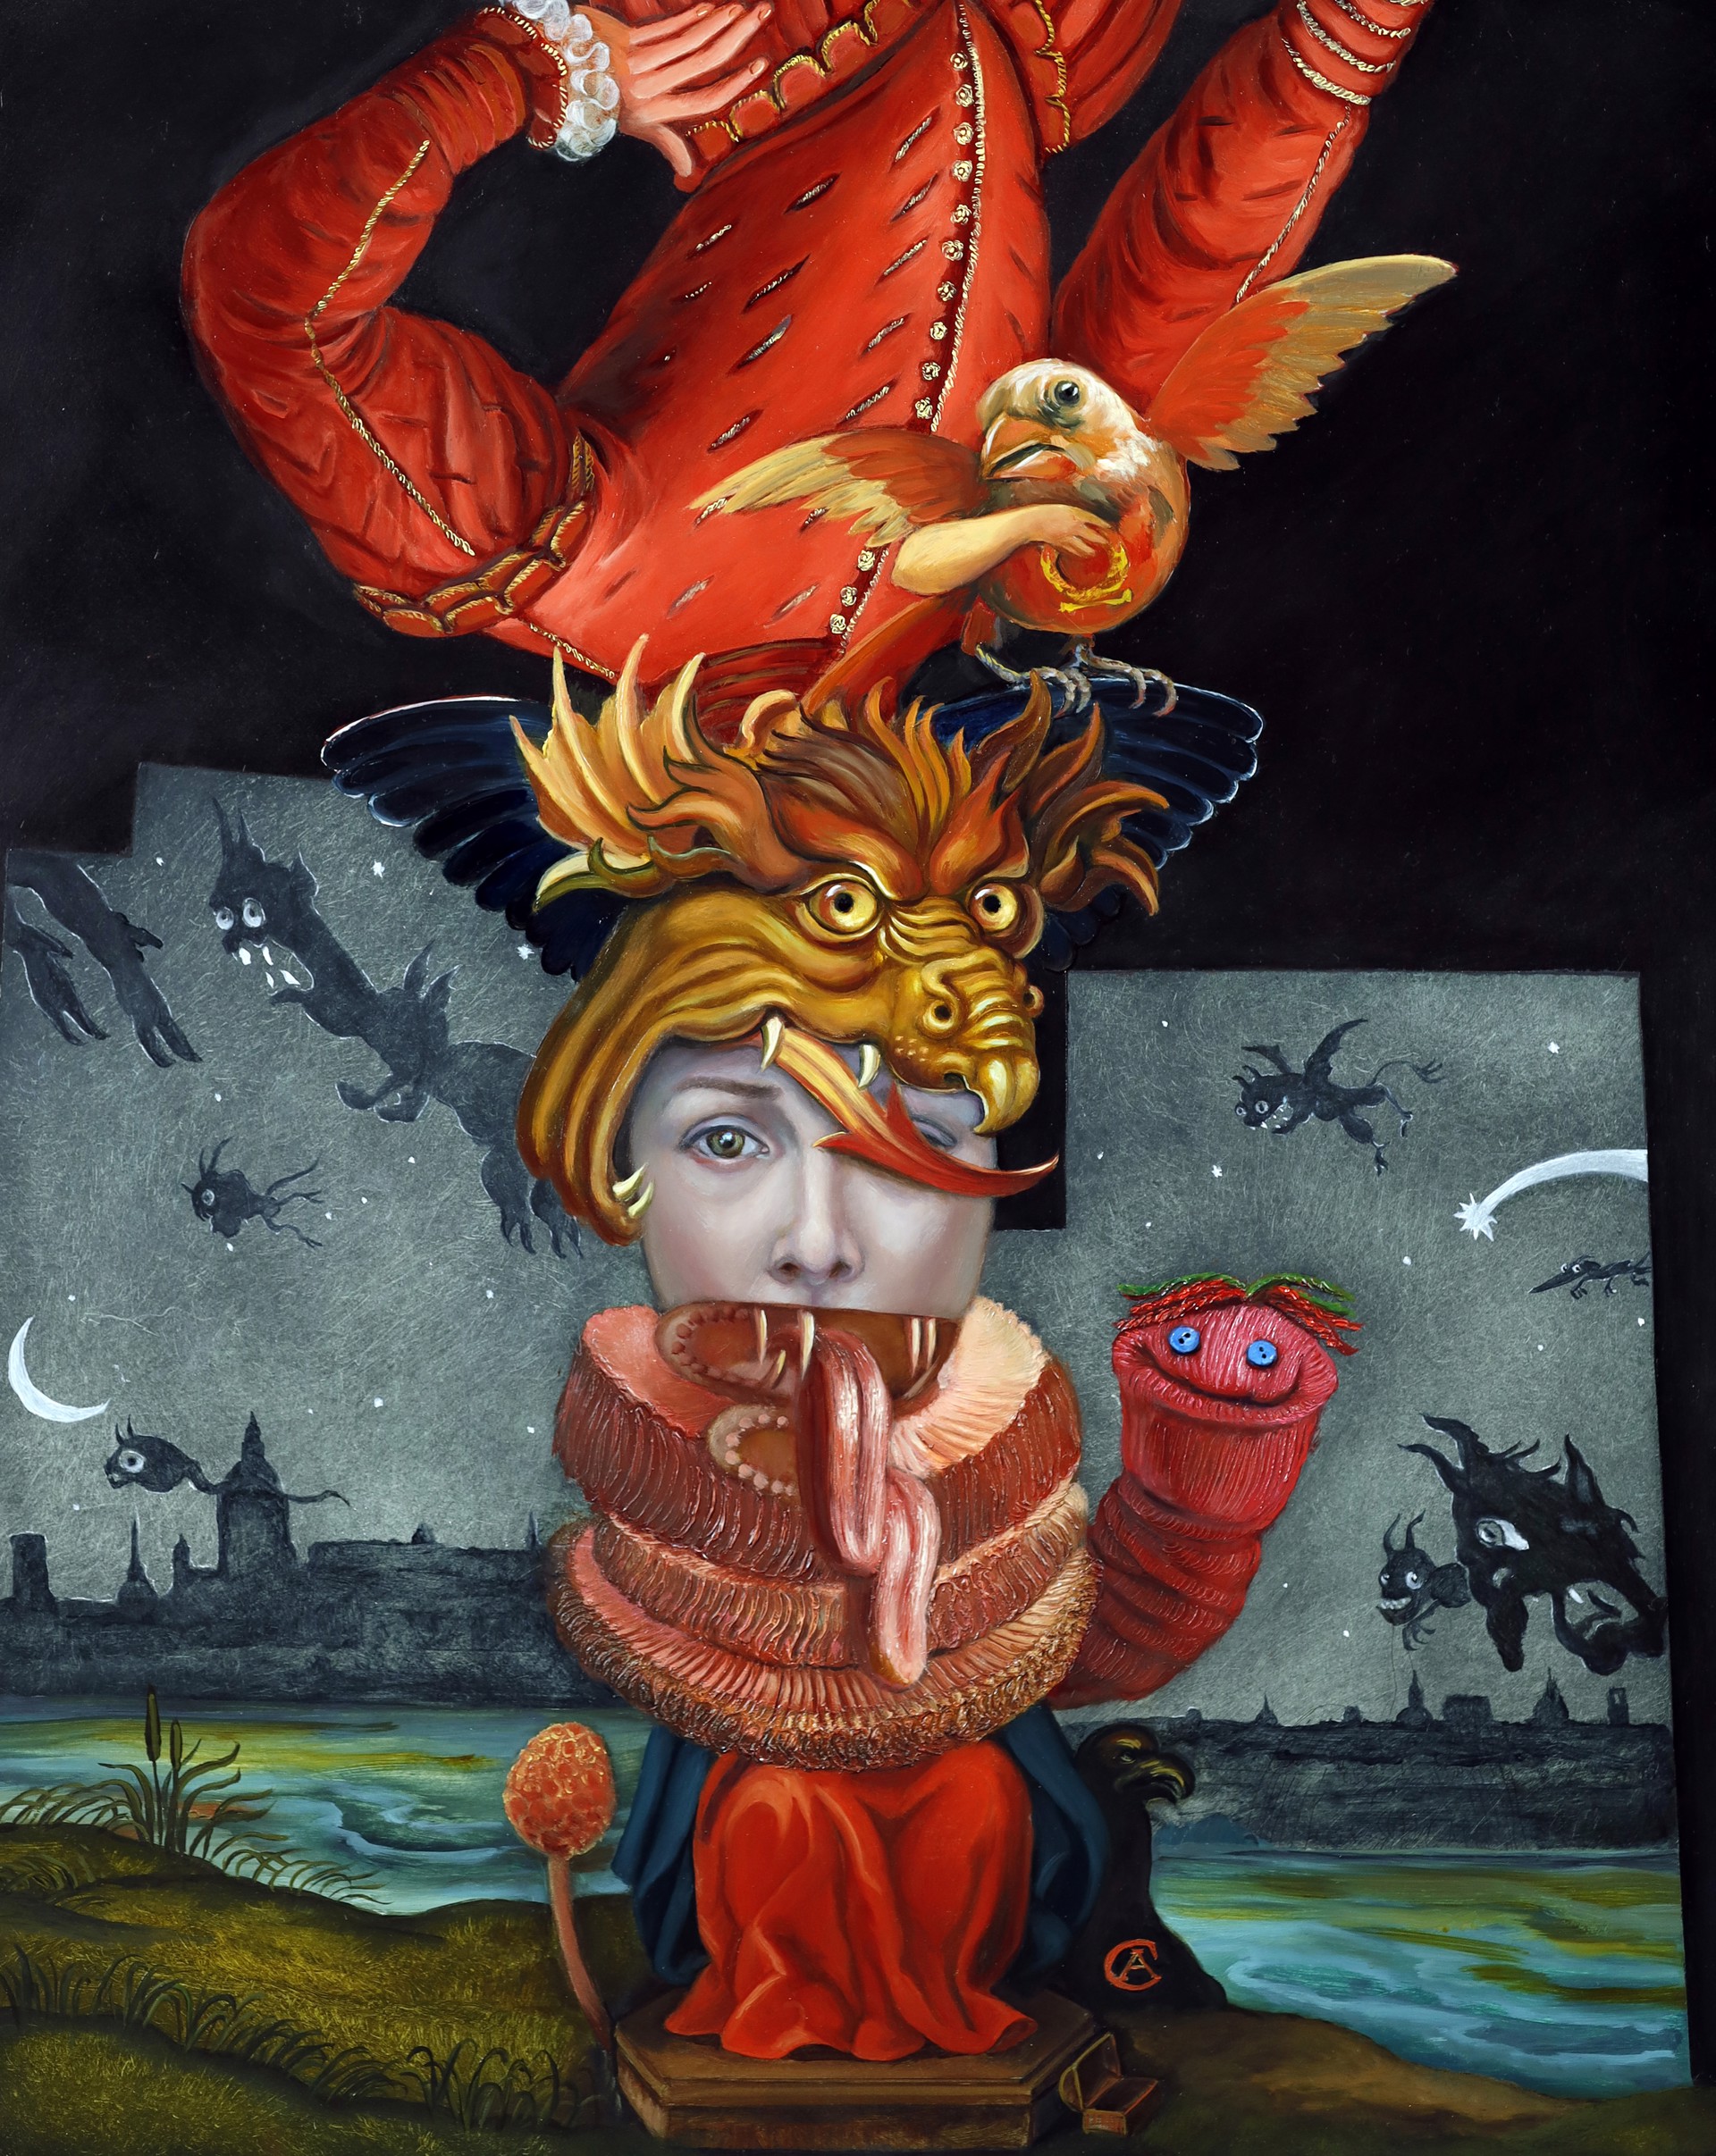 Self-Portrait as Mephistopheles by Carrie Ann Baade